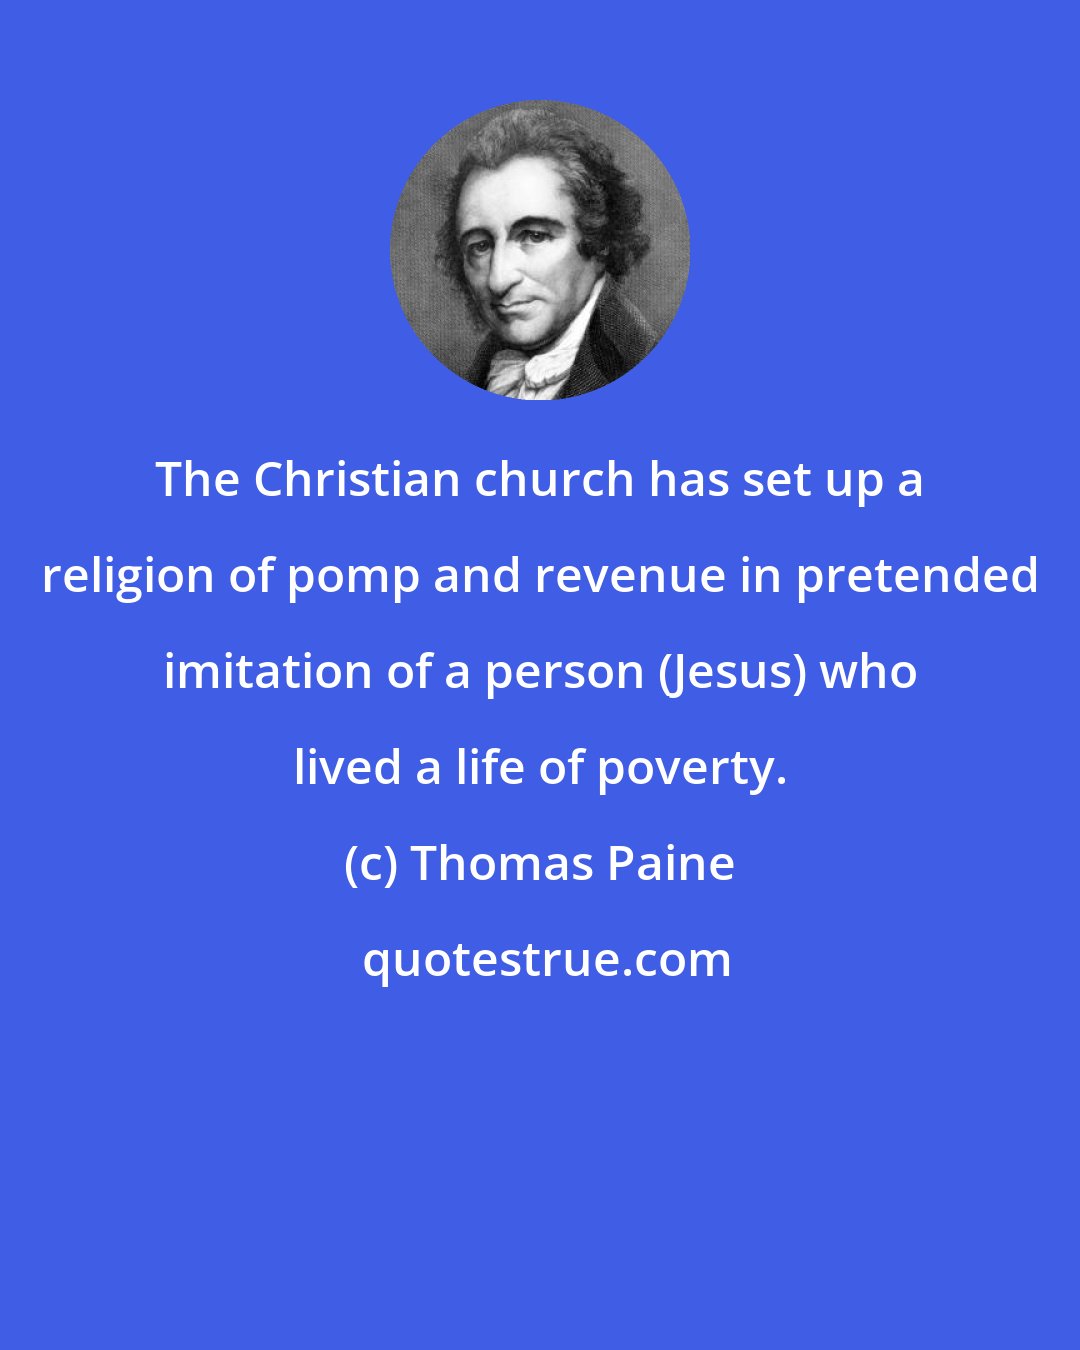 Thomas Paine: The Christian church has set up a religion of pomp and revenue in pretended imitation of a person (Jesus) who lived a life of poverty.